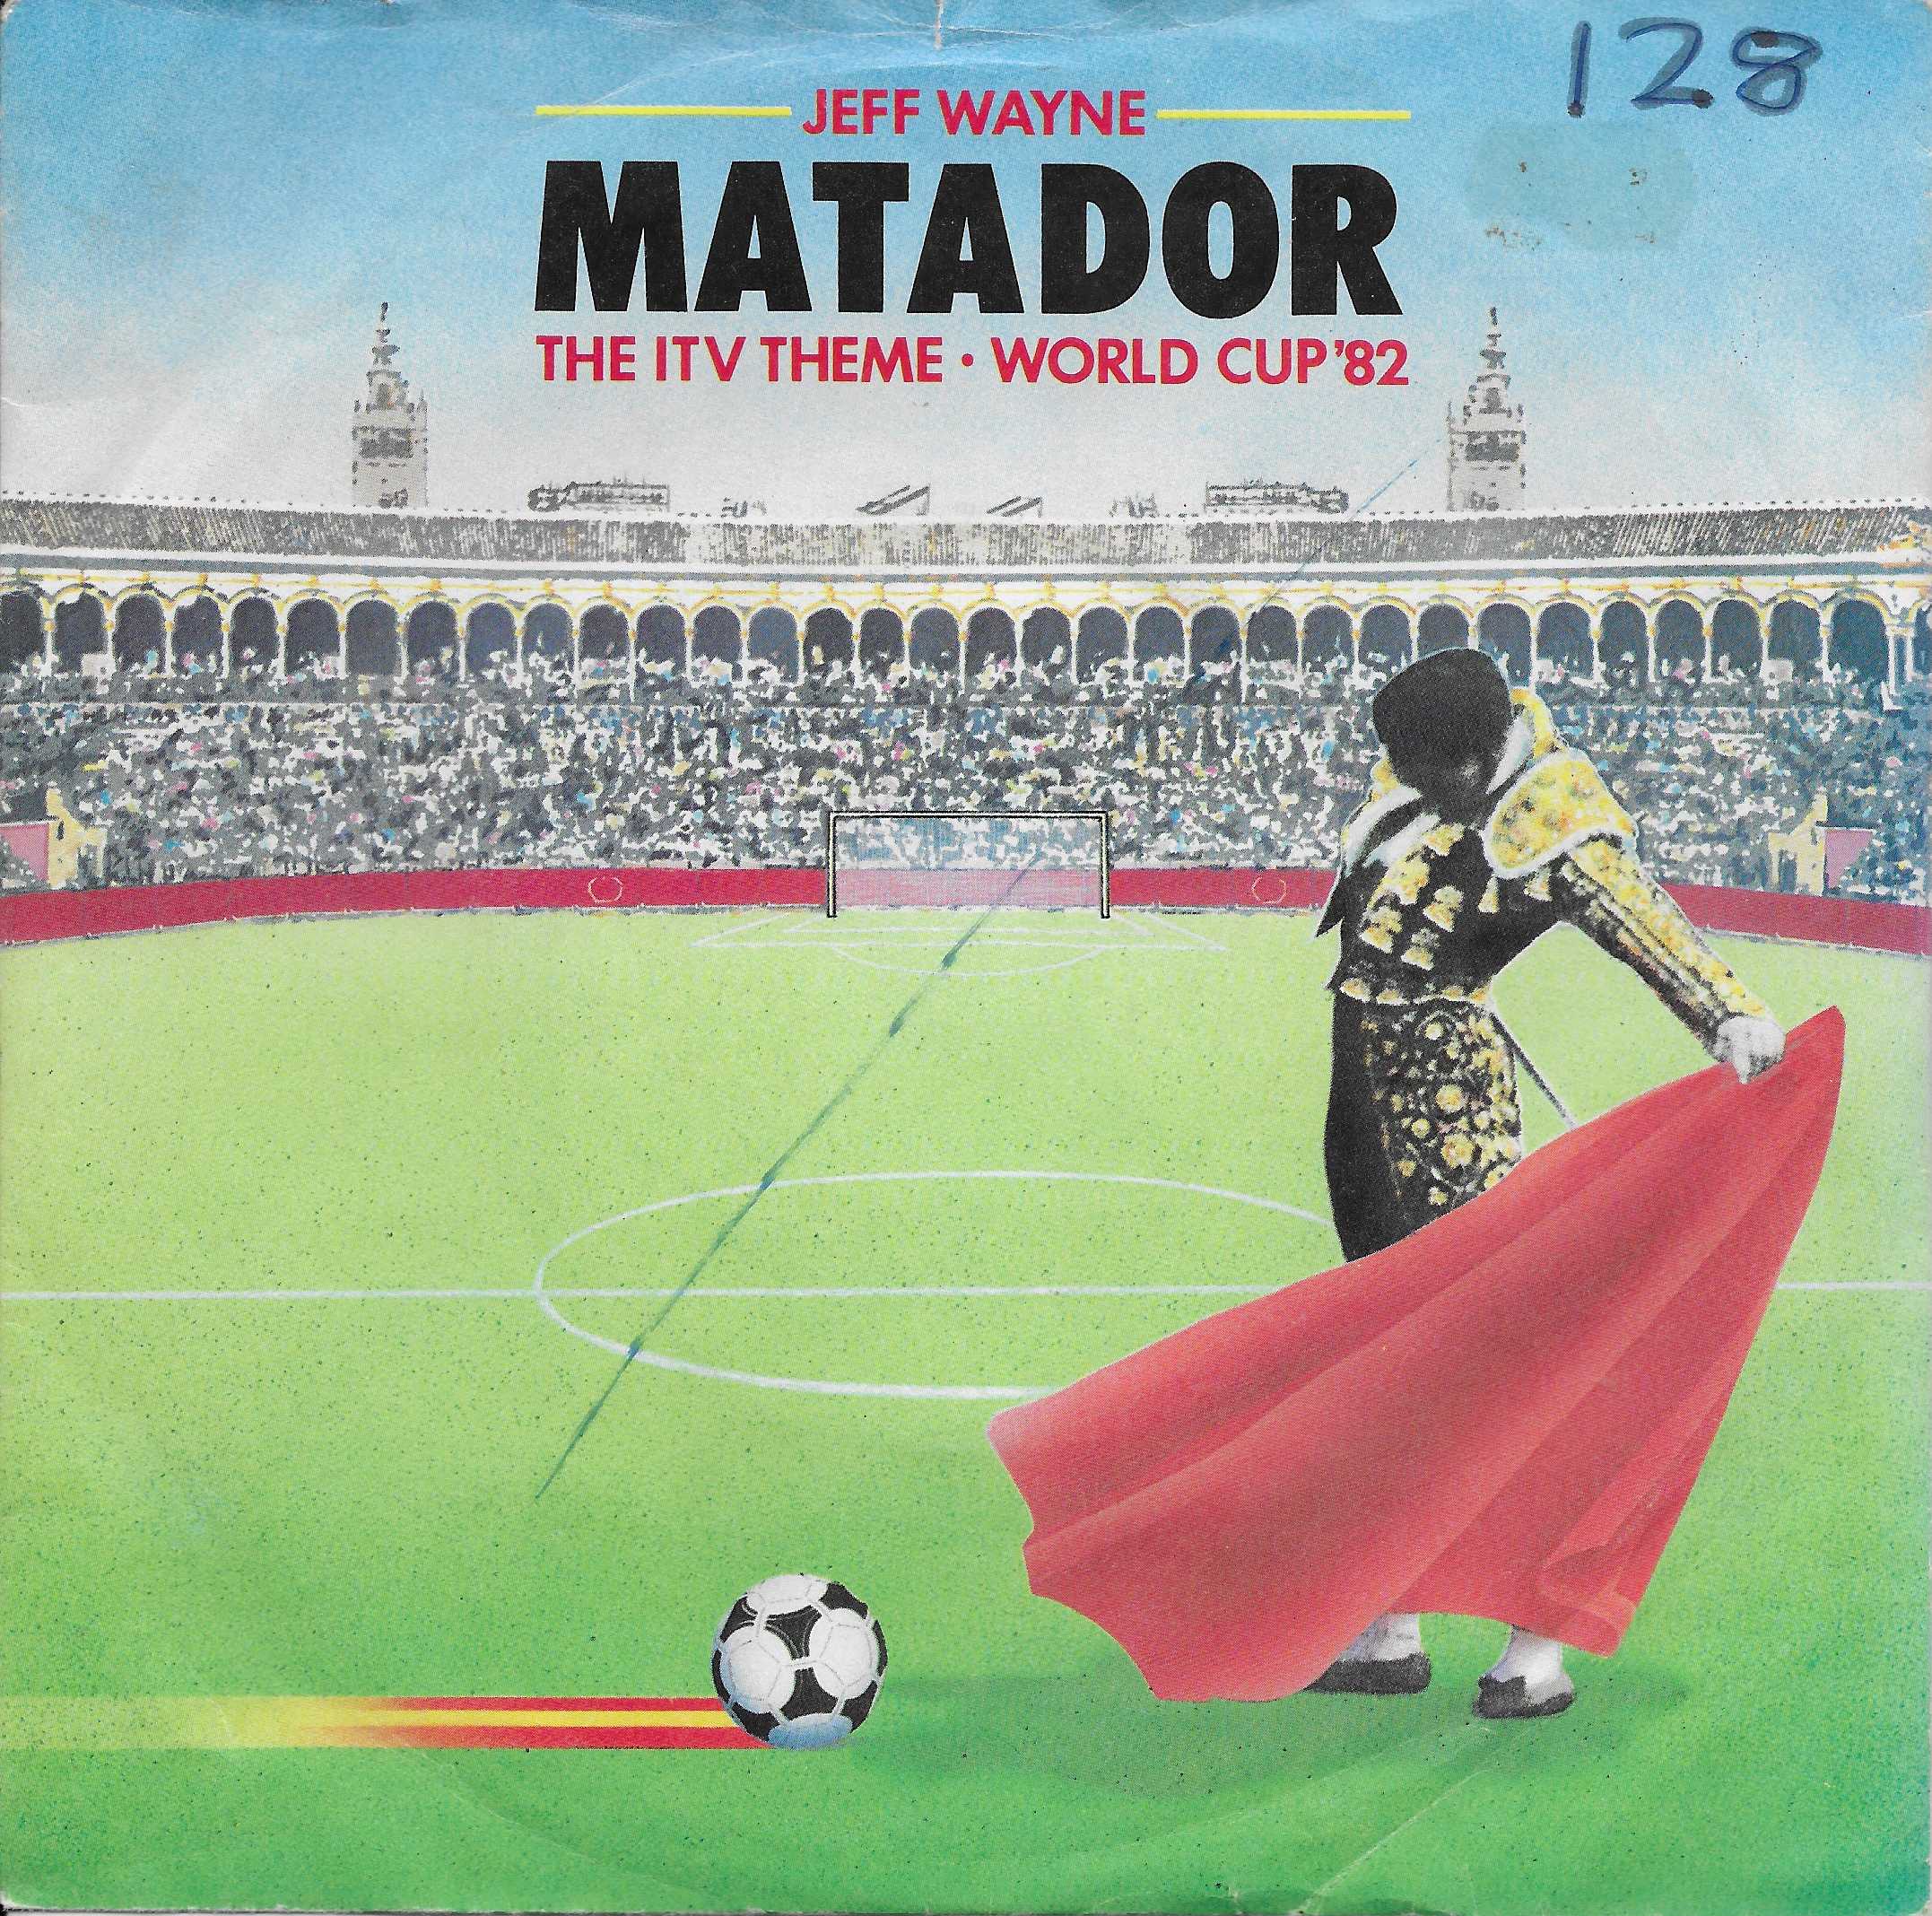 Picture of A 2493 Matador (ITV World Cup theme (1982)) by artist Jeff Wayne from ITV, Channel 4 and Channel 5 singles library